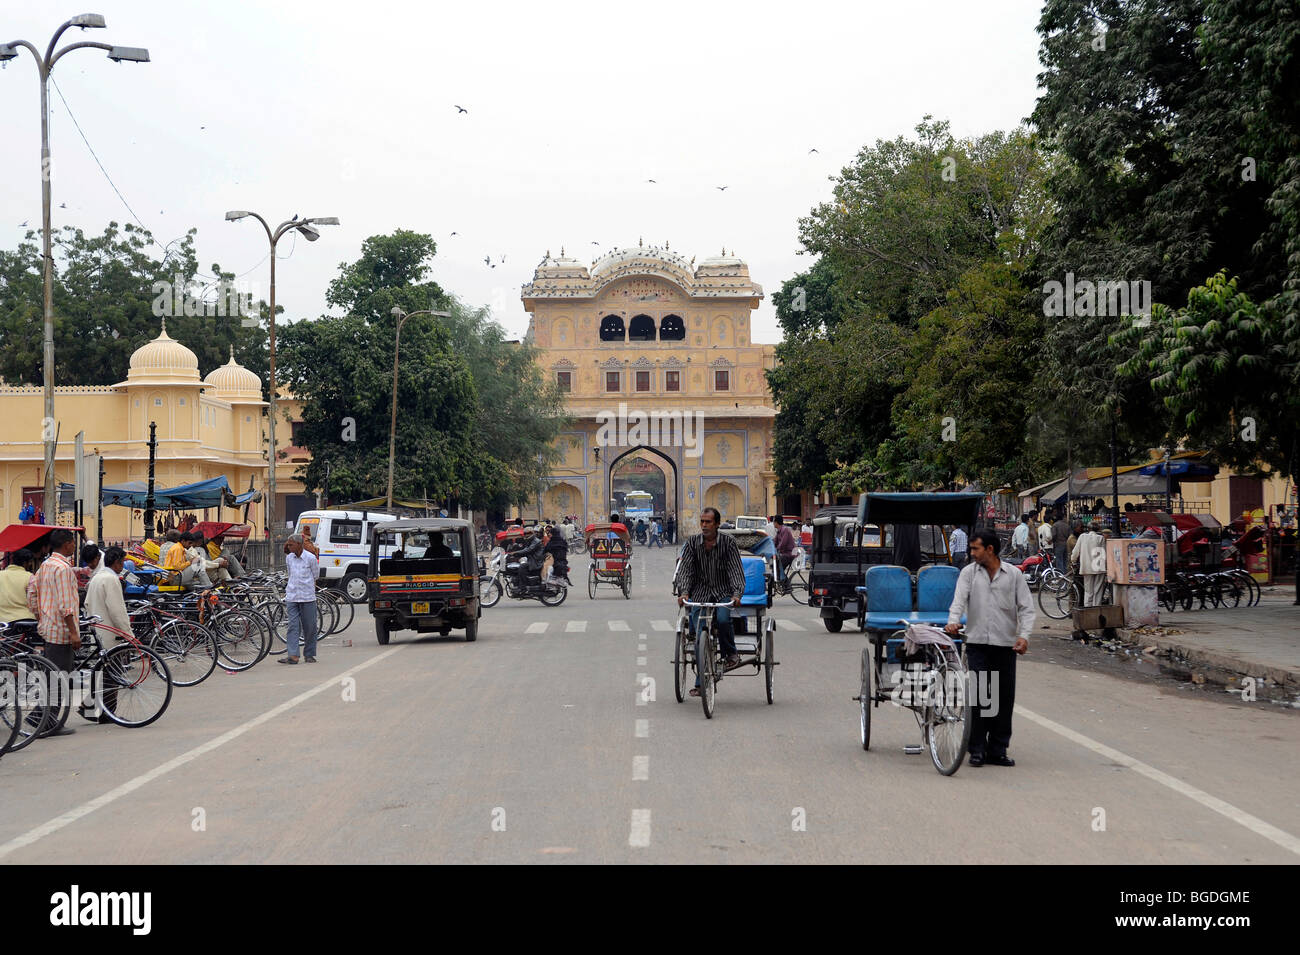 Bicycle rickshaws in front of the city gate, Jaipur, Rajasthan, North India, India, South Asia, Asia Stock Photo